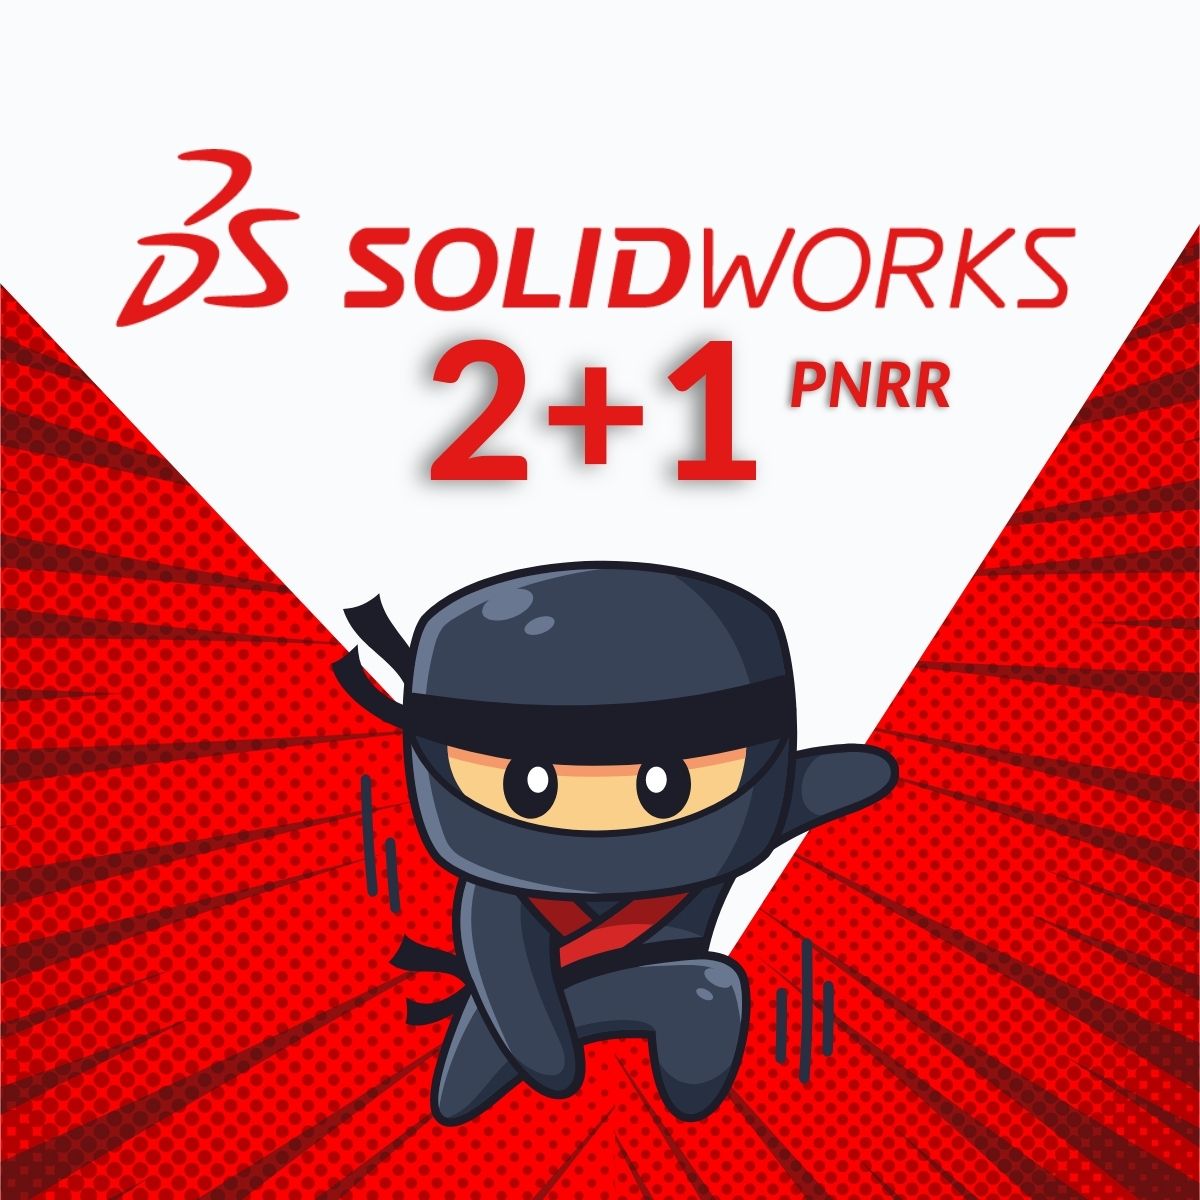 2+1 solidworks